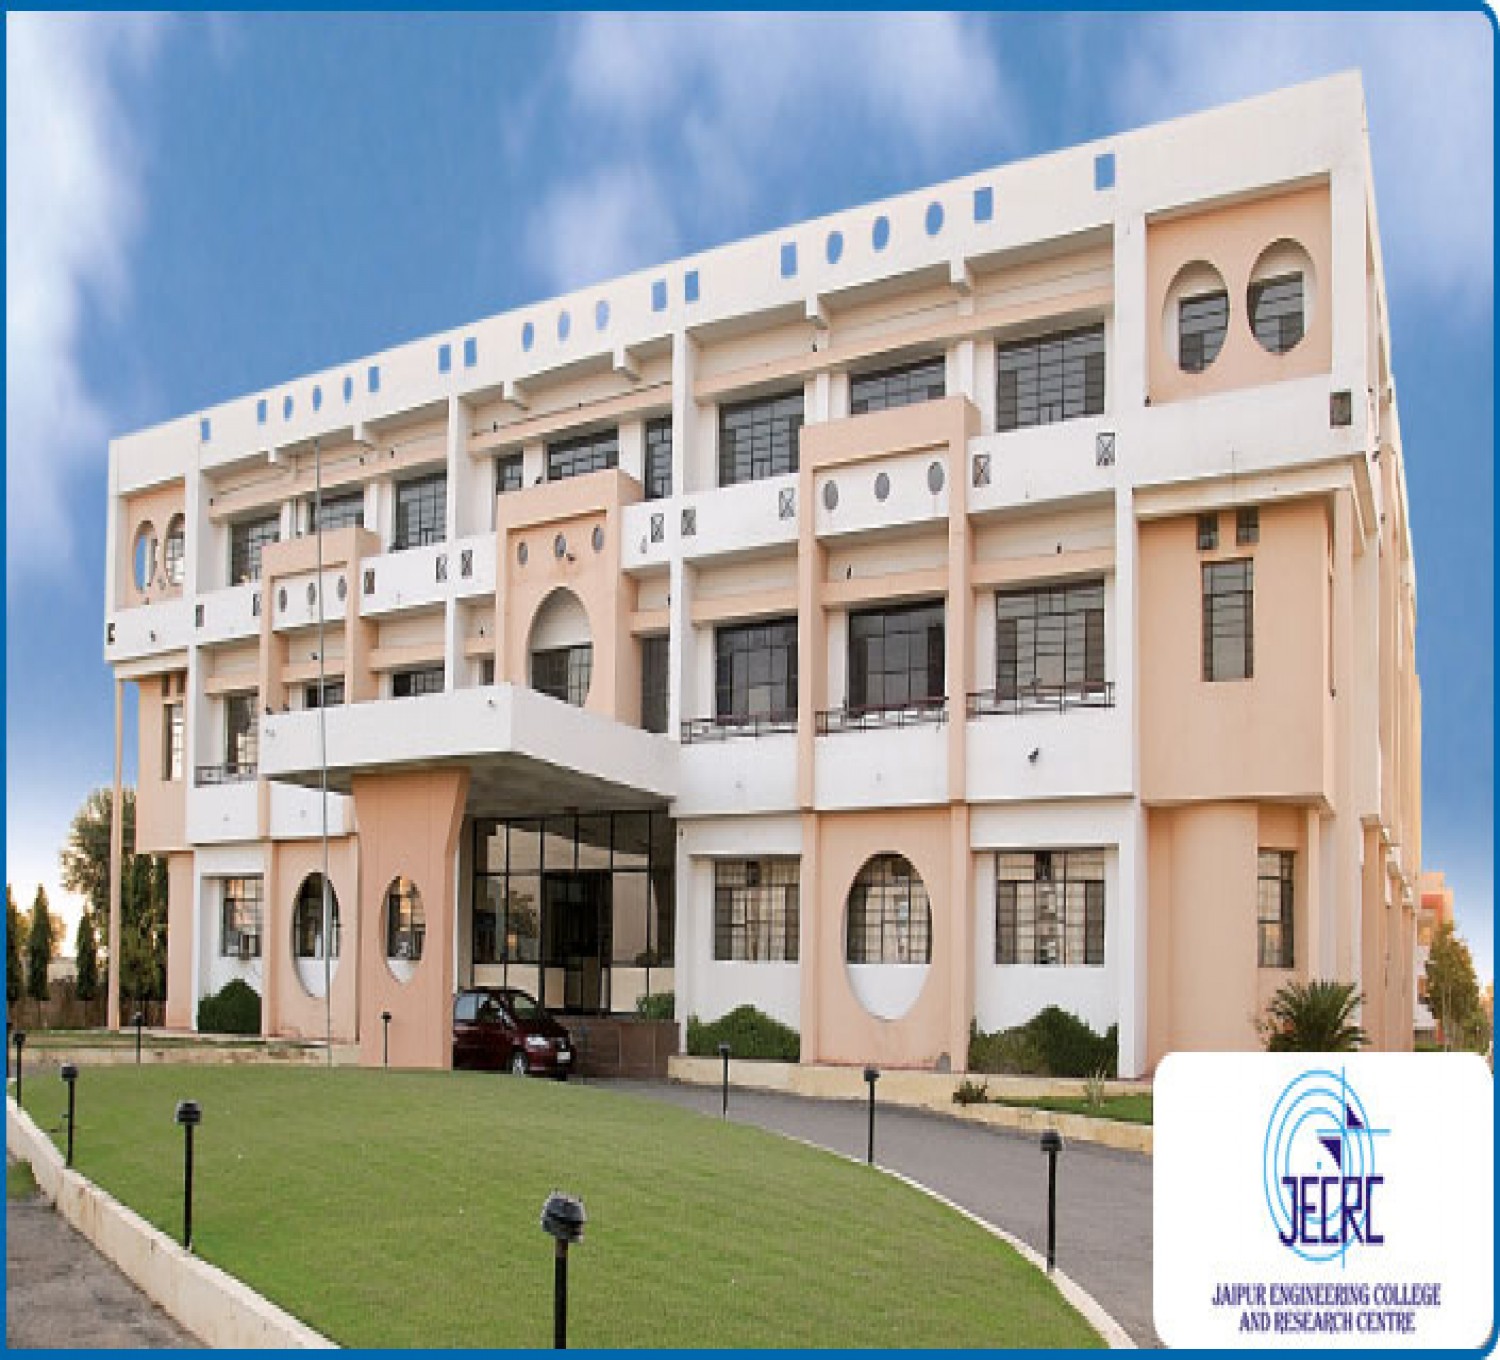 Jaipur Engineering College And Research Centre-cover